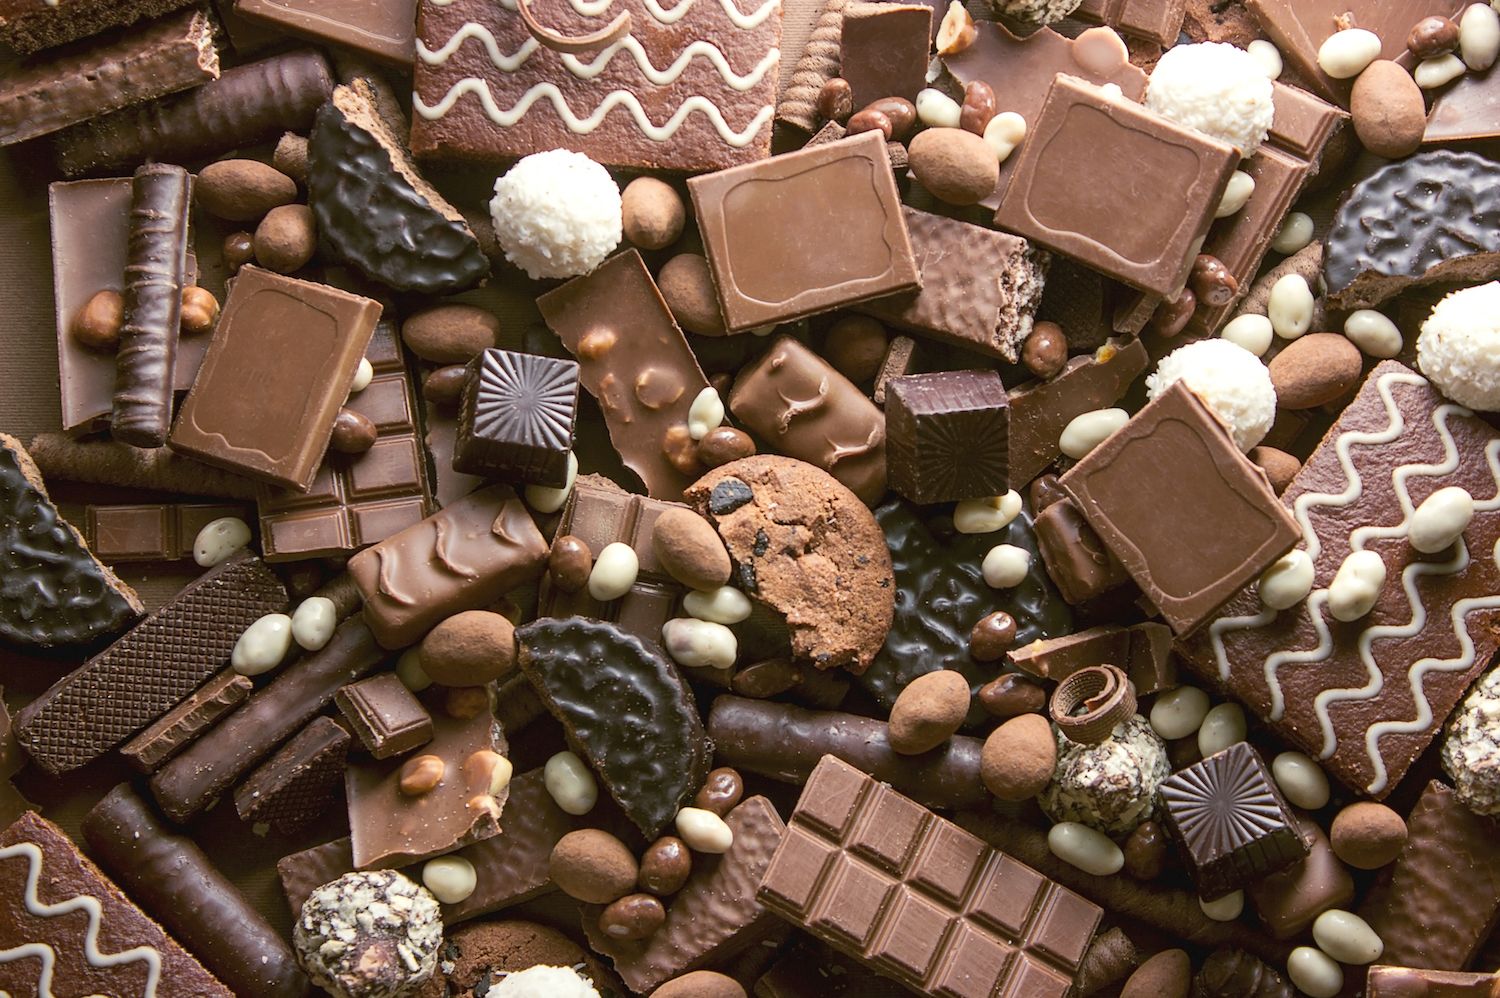 World Chocolate Day 2021 Here Is The History Of Chocolate And Know How It  Is Good For Health | World Chocolate Day 2021: History Of Chocolate And  Benefits Of Eating Chocolate.